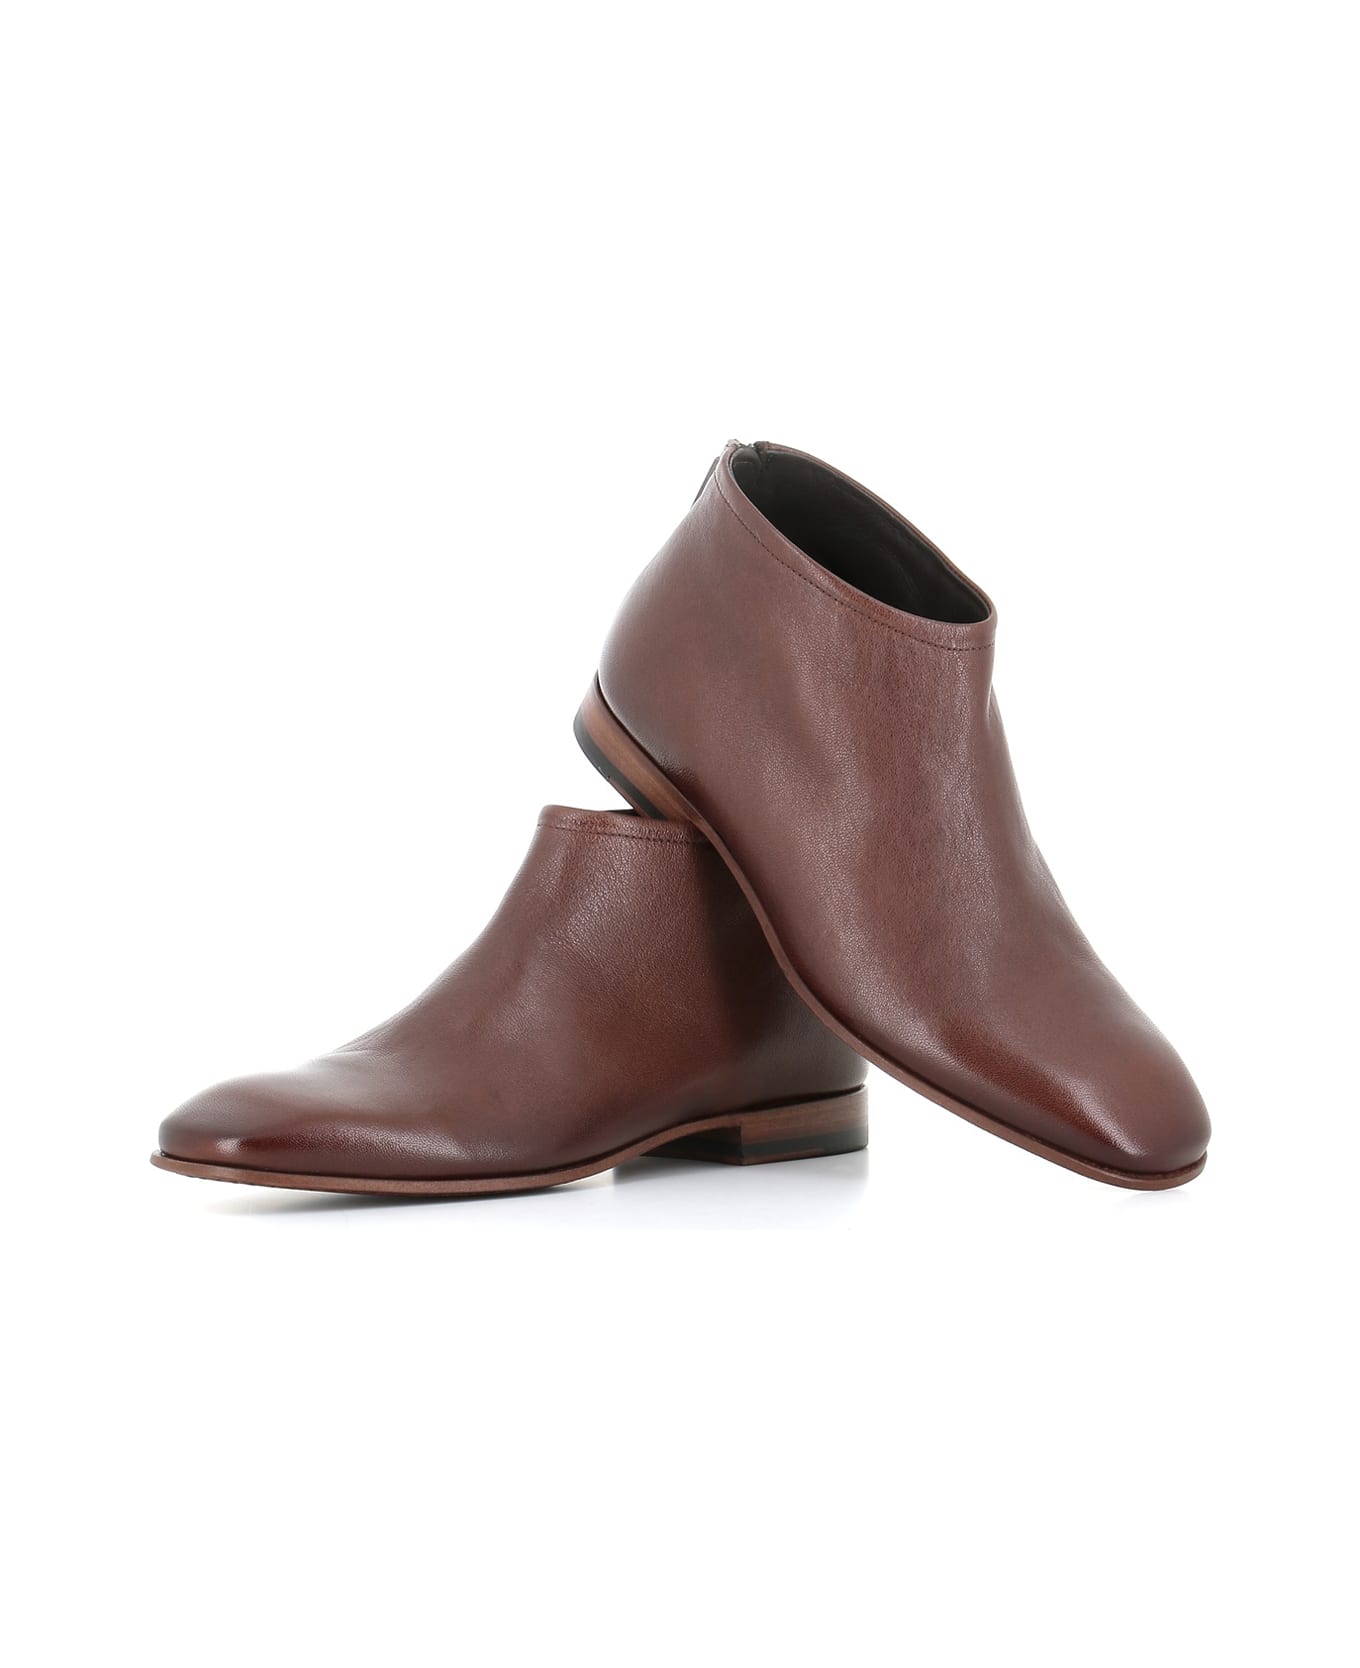 Pantanetti Ankle Boot 17120d - Brown ブーツ